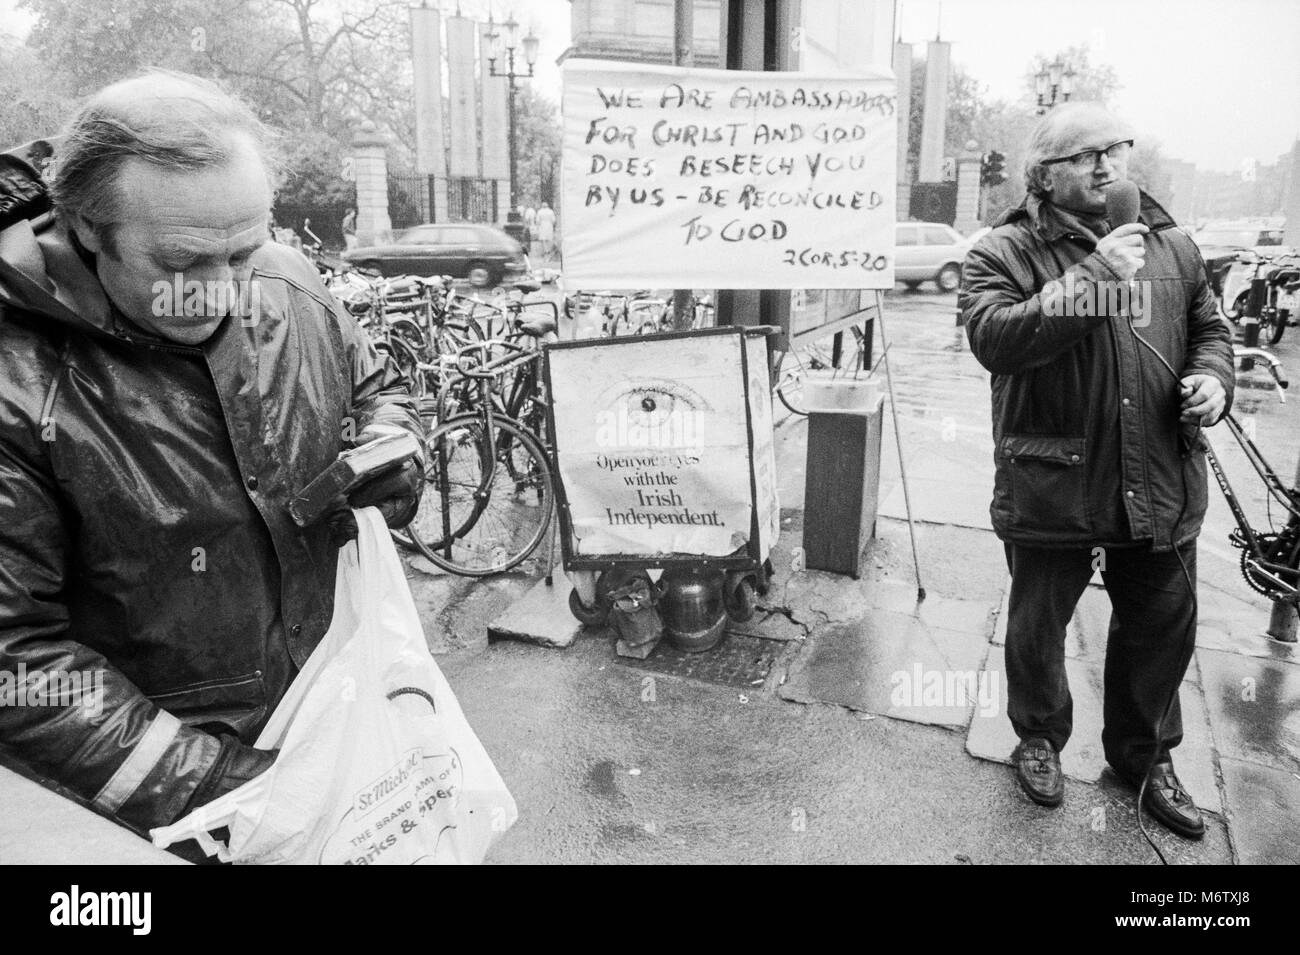 Three men preaching in the street at St Stephens Green, Dublin City Center, Ireland, Archival photograph from April 1988 Stock Photo